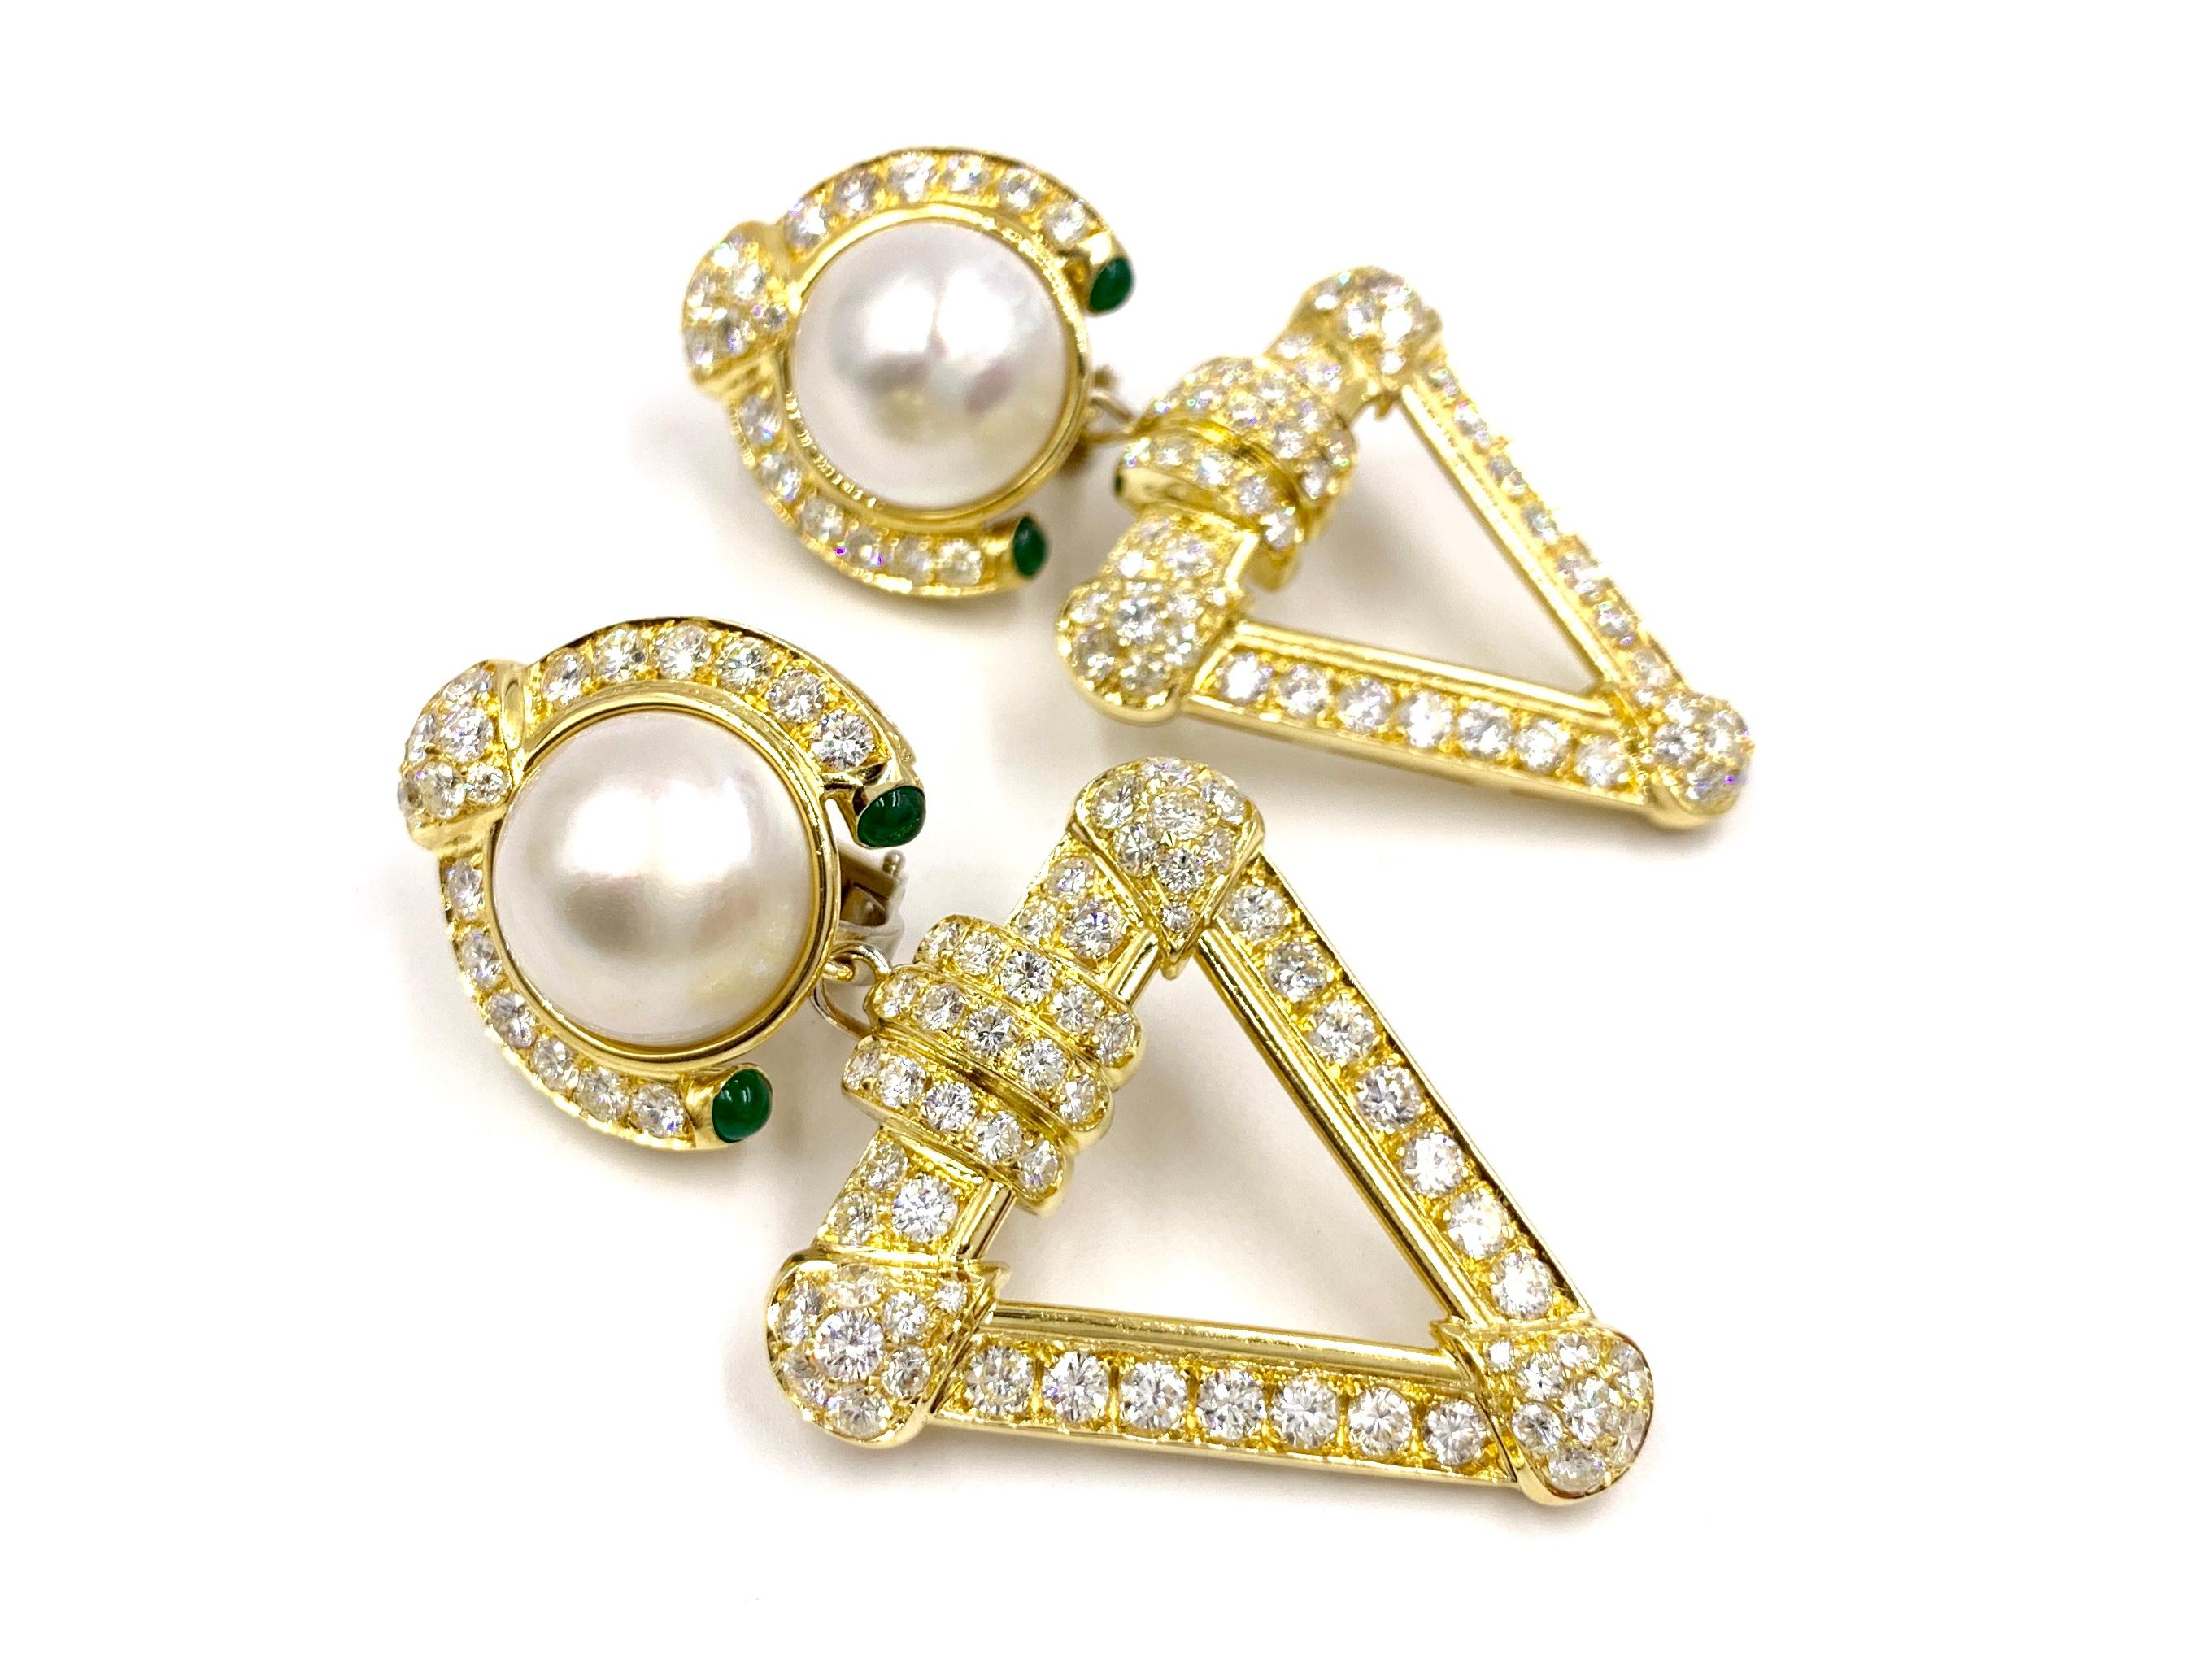 Simply exquisite Italian made 18 karat yellow gold earrings with versatility. These modern earrings can be worn as a button style earring or with the triangular diamond drop for a generous amount of sparkle. Earrings feature 10.68 carats of high